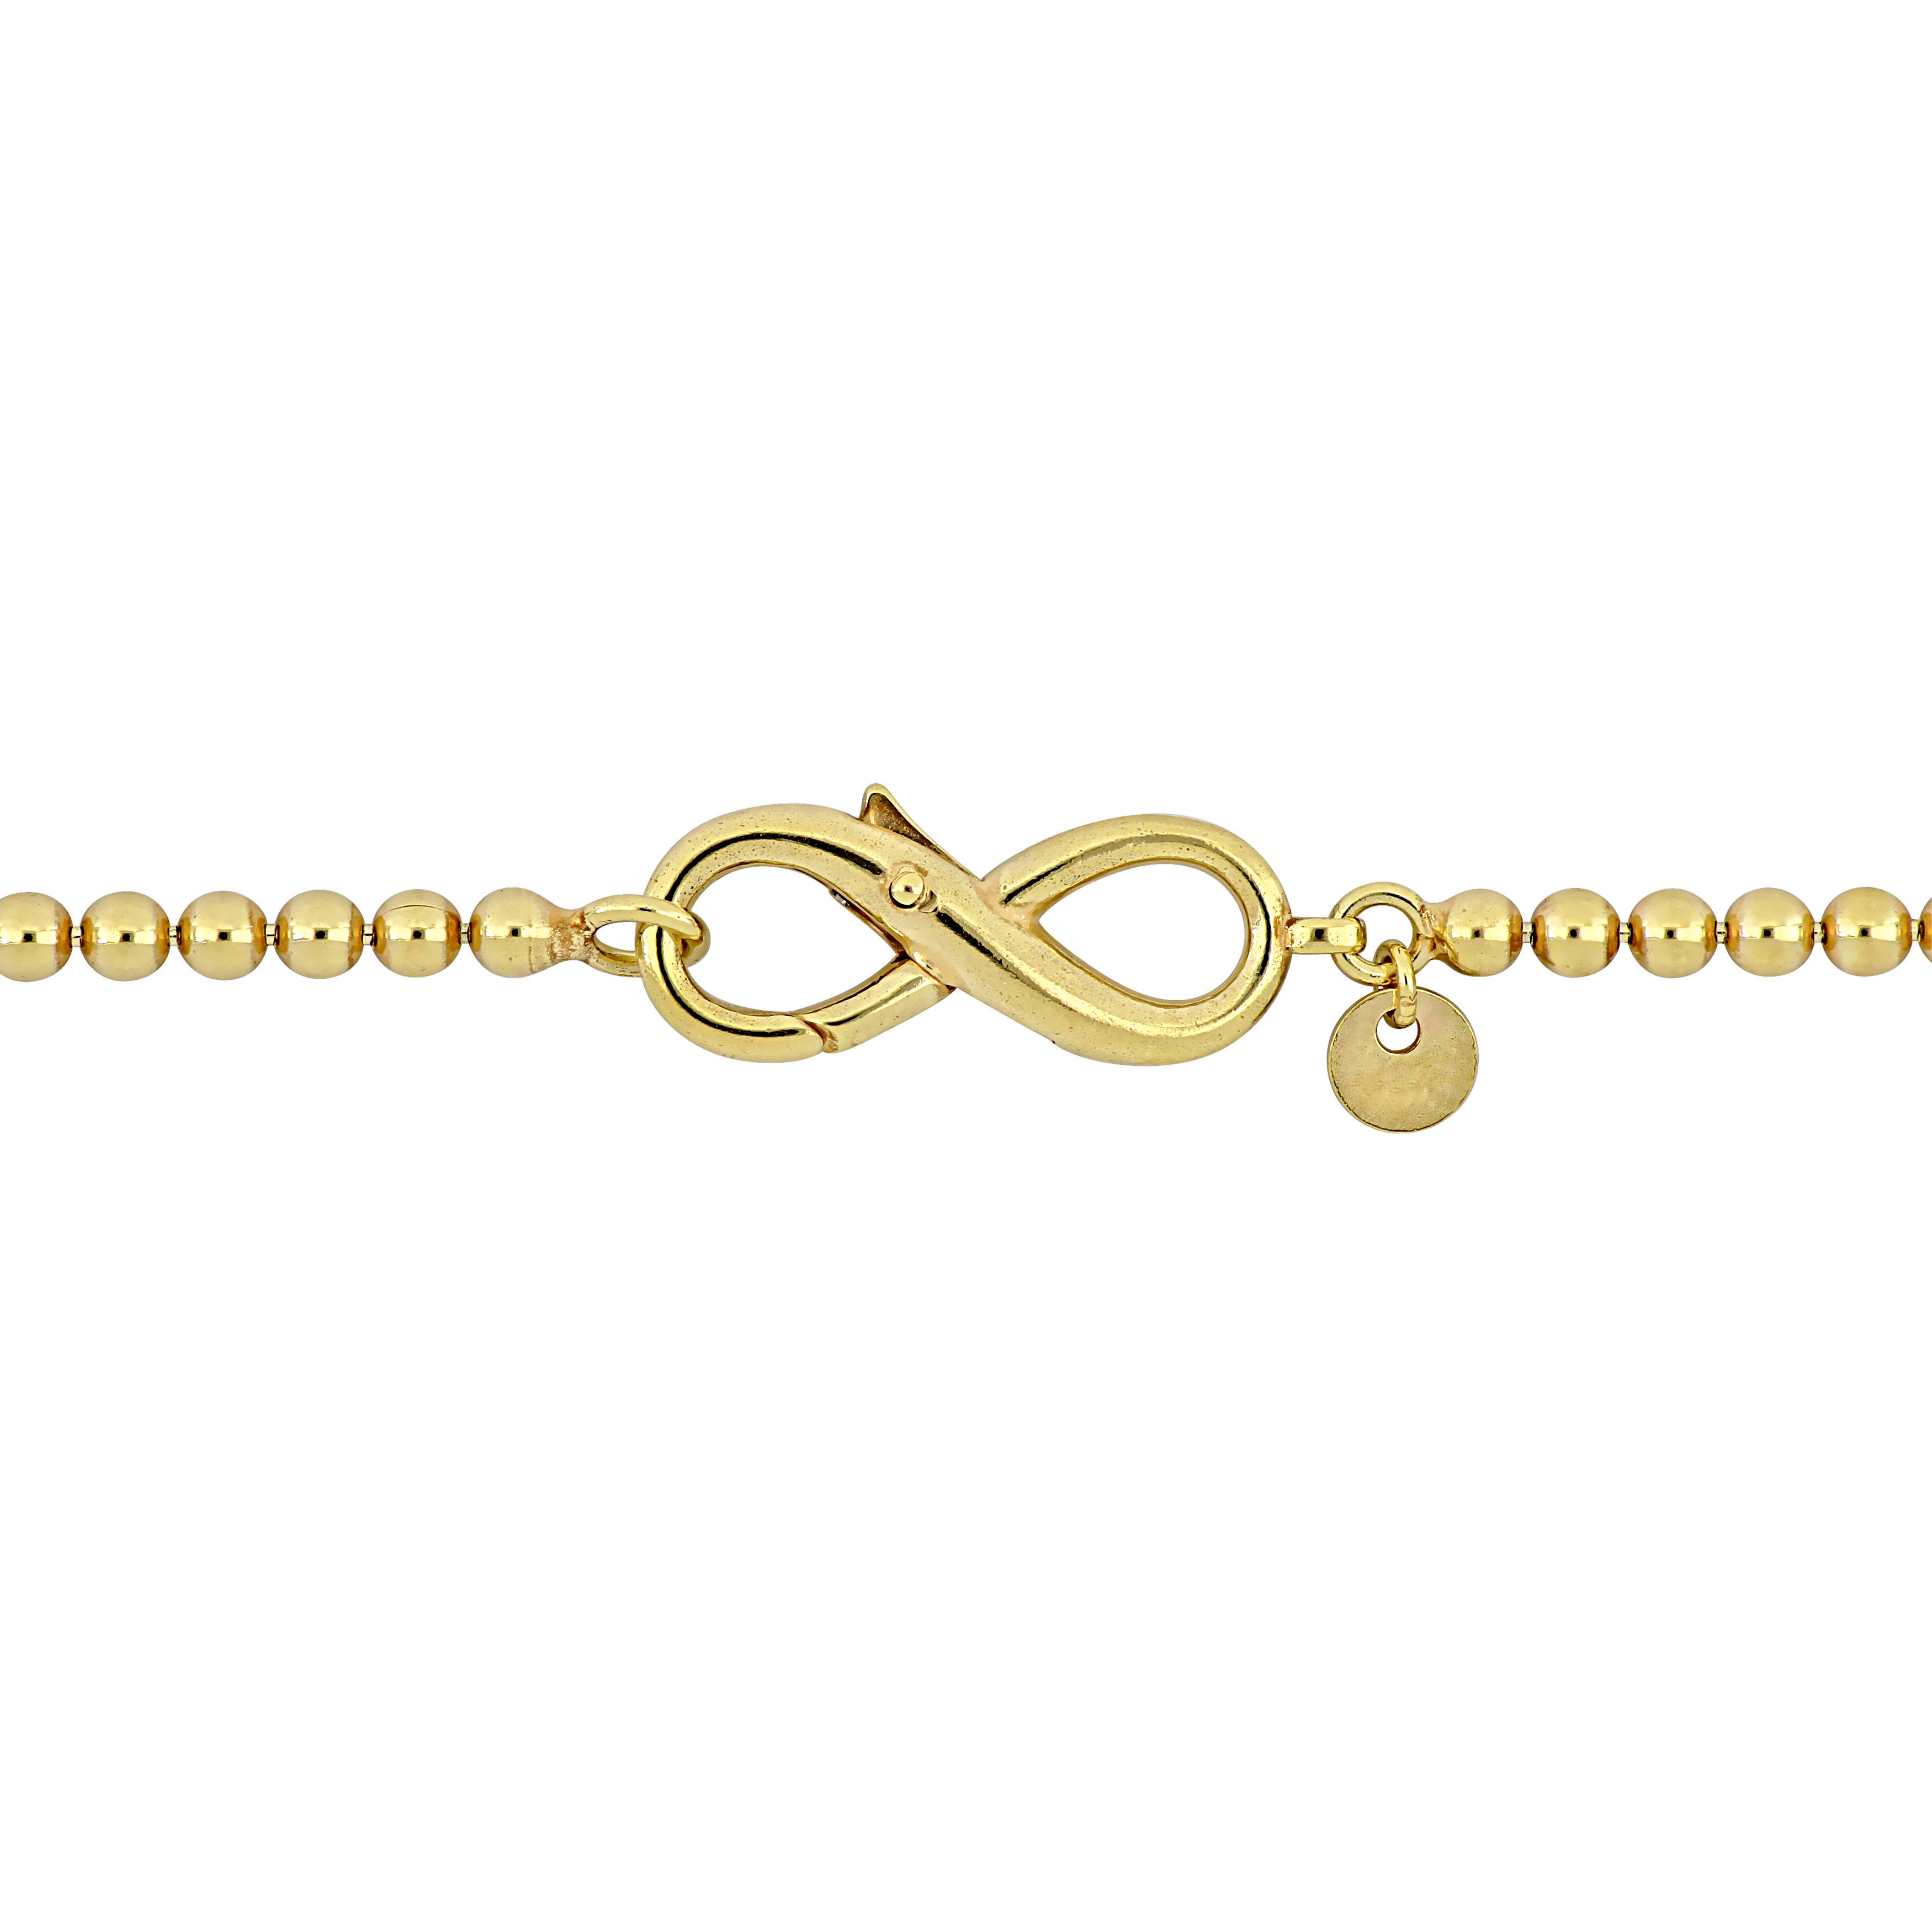 Ball Link Bracelet with Infinity Clasp in Yellow Plated Sterling Silver - 7.5 in.